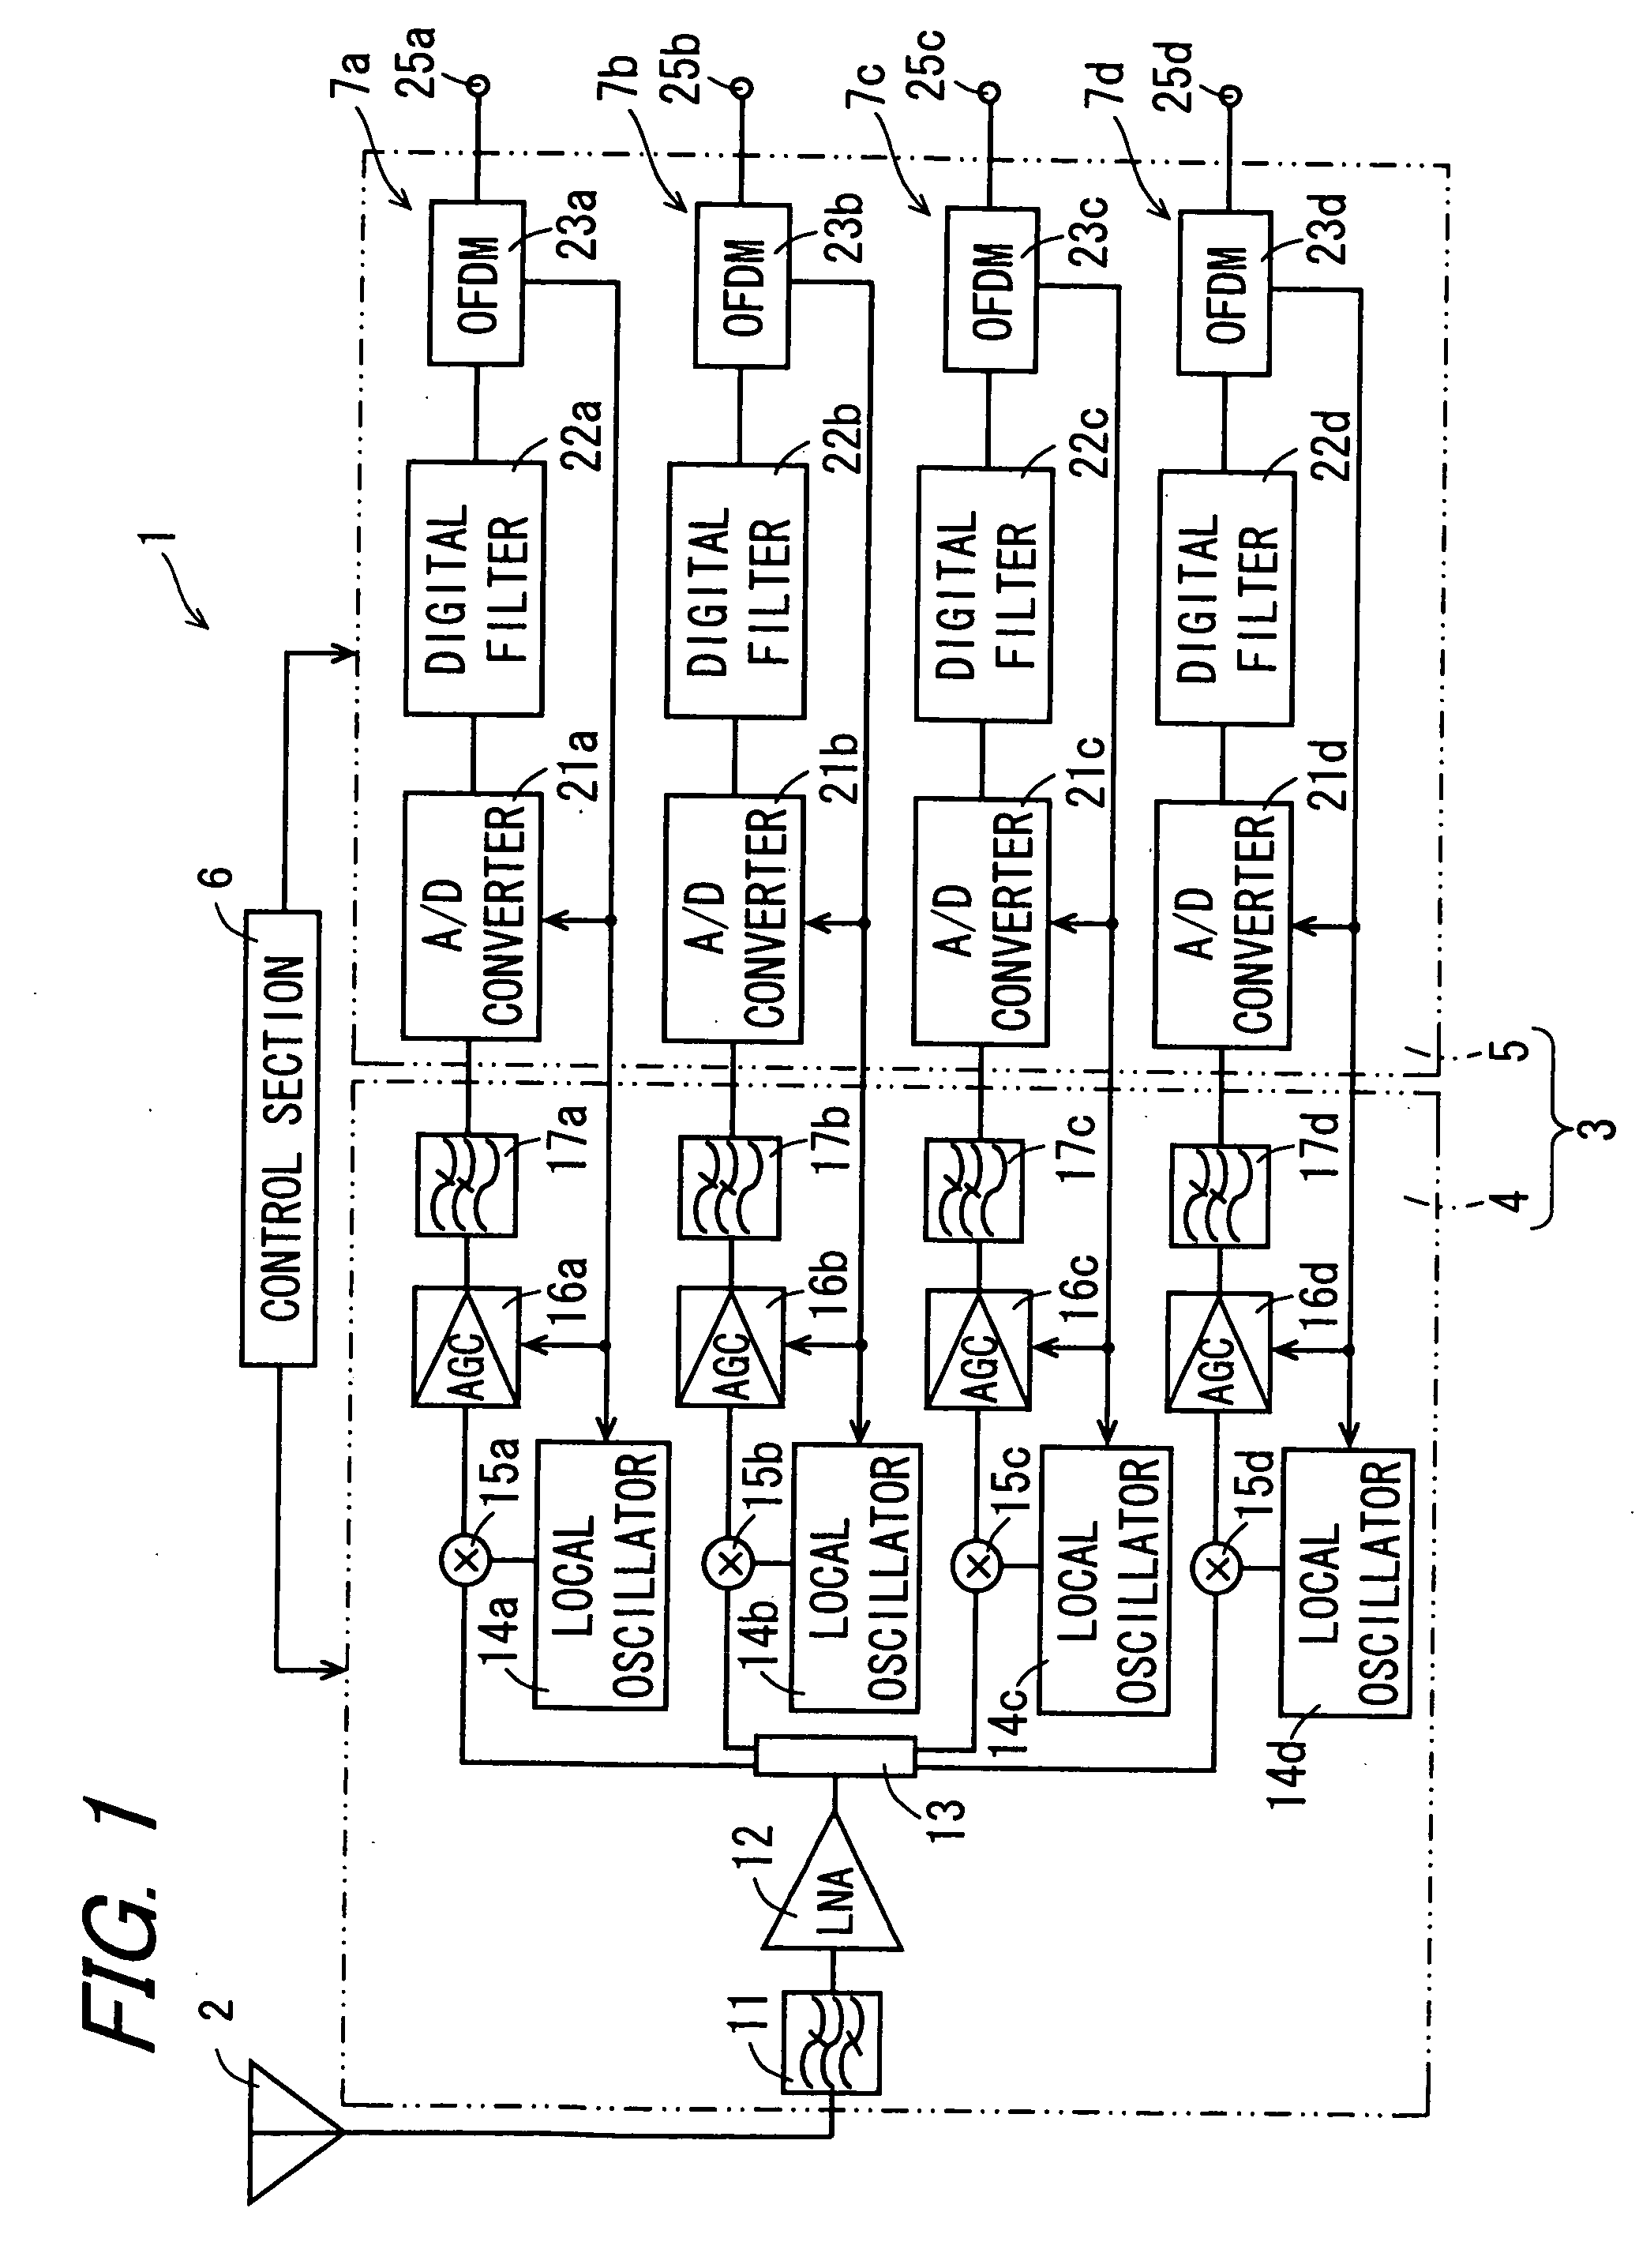 Receiver apparatus and information recording/outputting apparatus